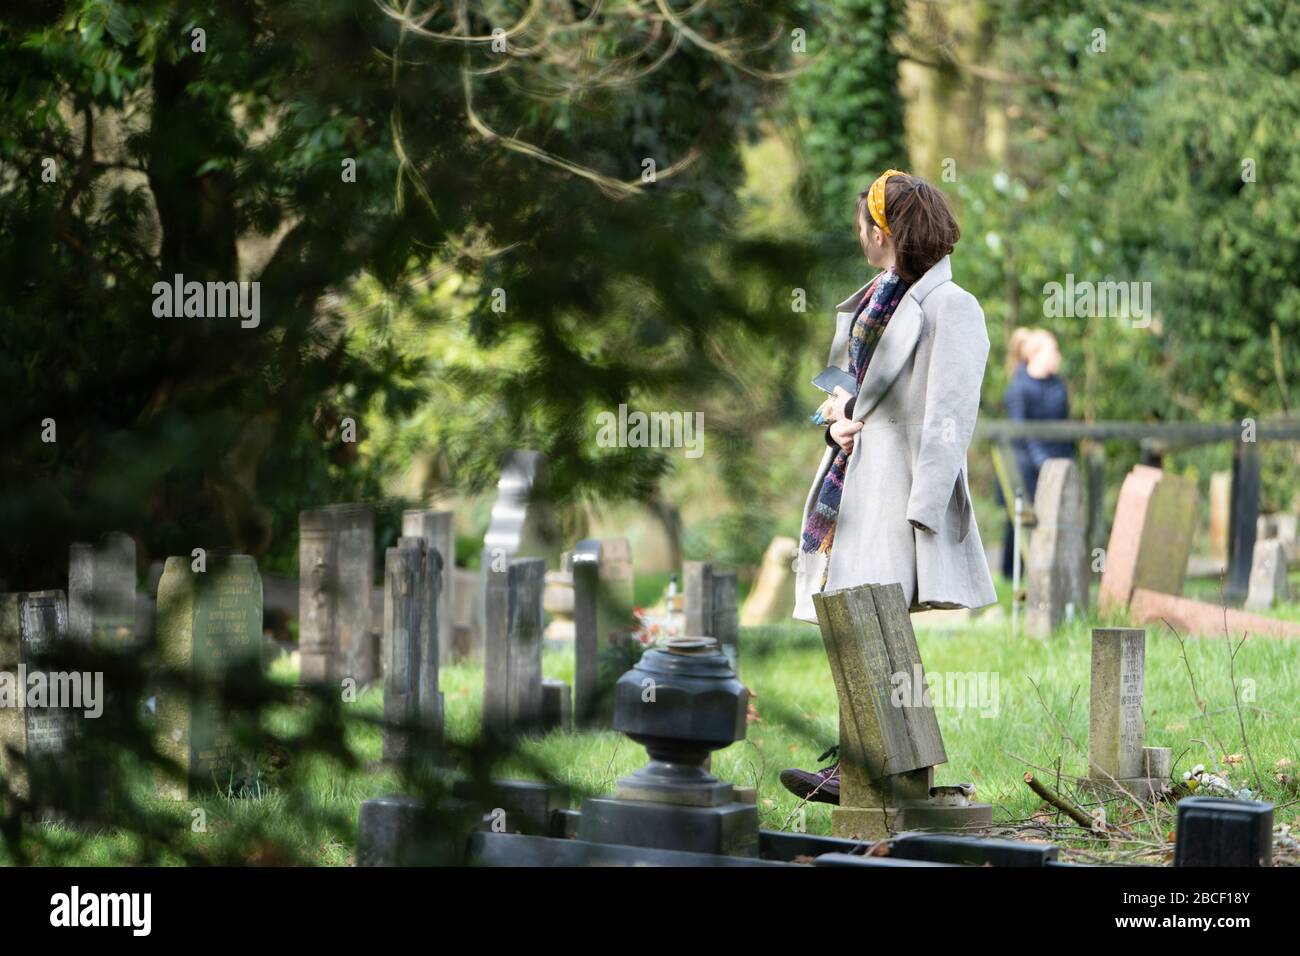 A young woman wearing a grey coat, thoughtfully standing amongst gravestones in a cemetery on a sunny day. UK Stock Photo